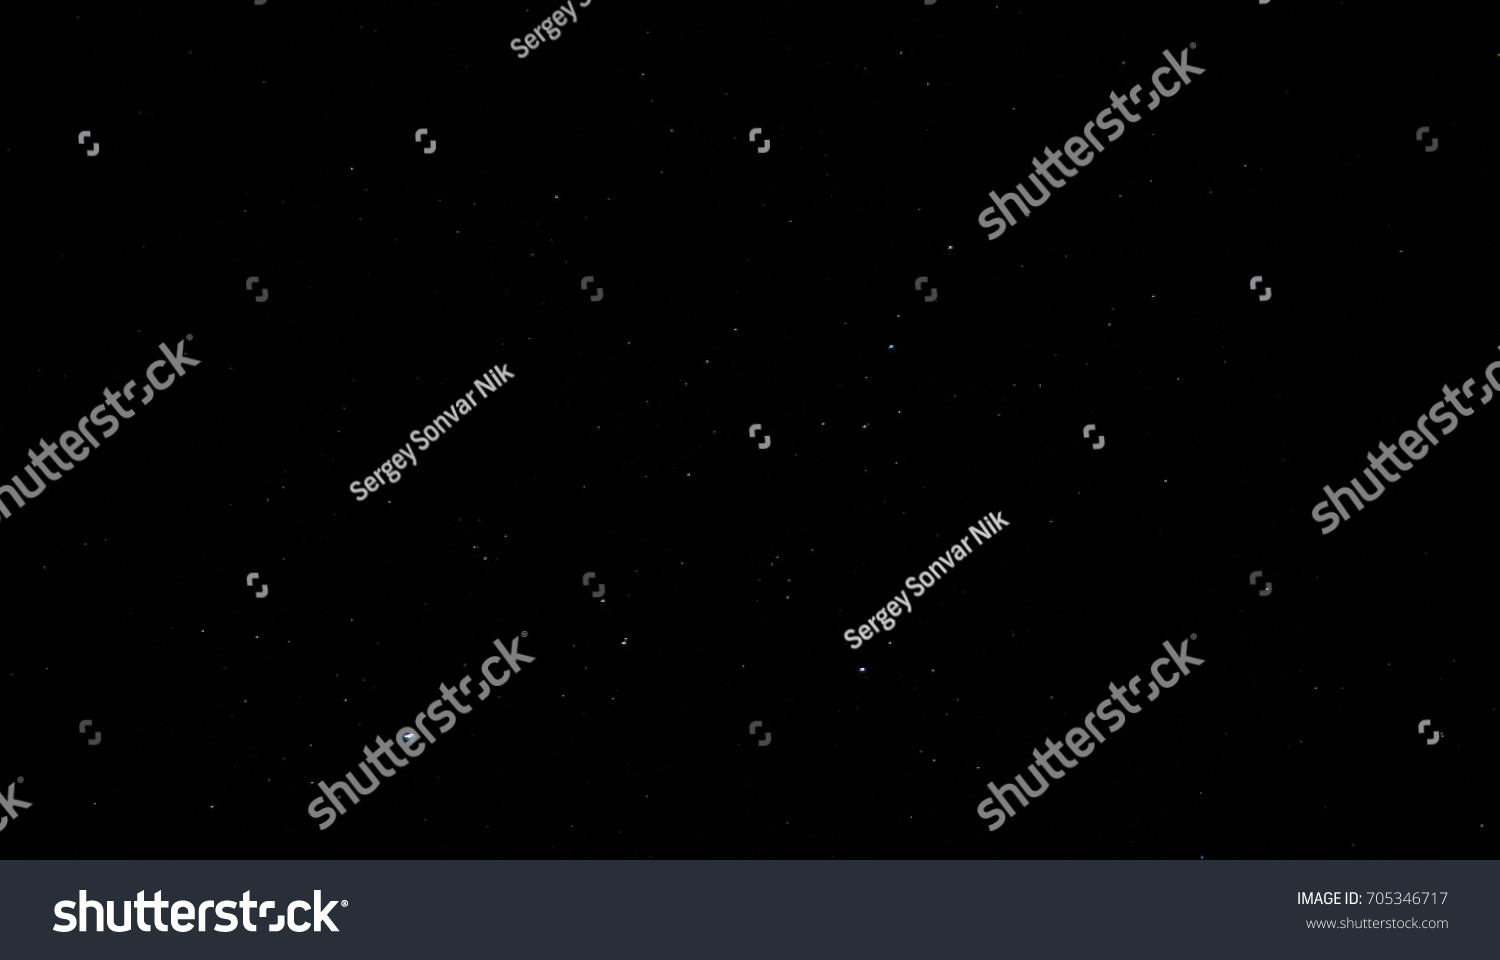 Part of a black starry night sky in the constellation Pegasus #705346717